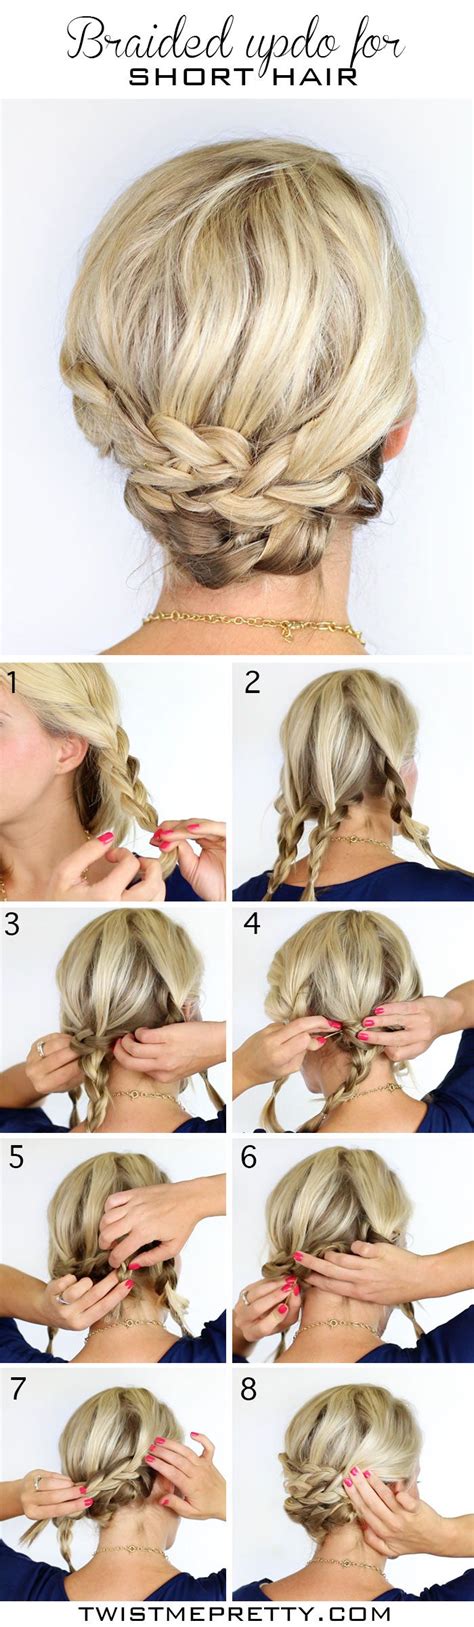 Updos for short curly hair 12 Pretty Braided Hairstyles for Short Hair - Pretty Designs